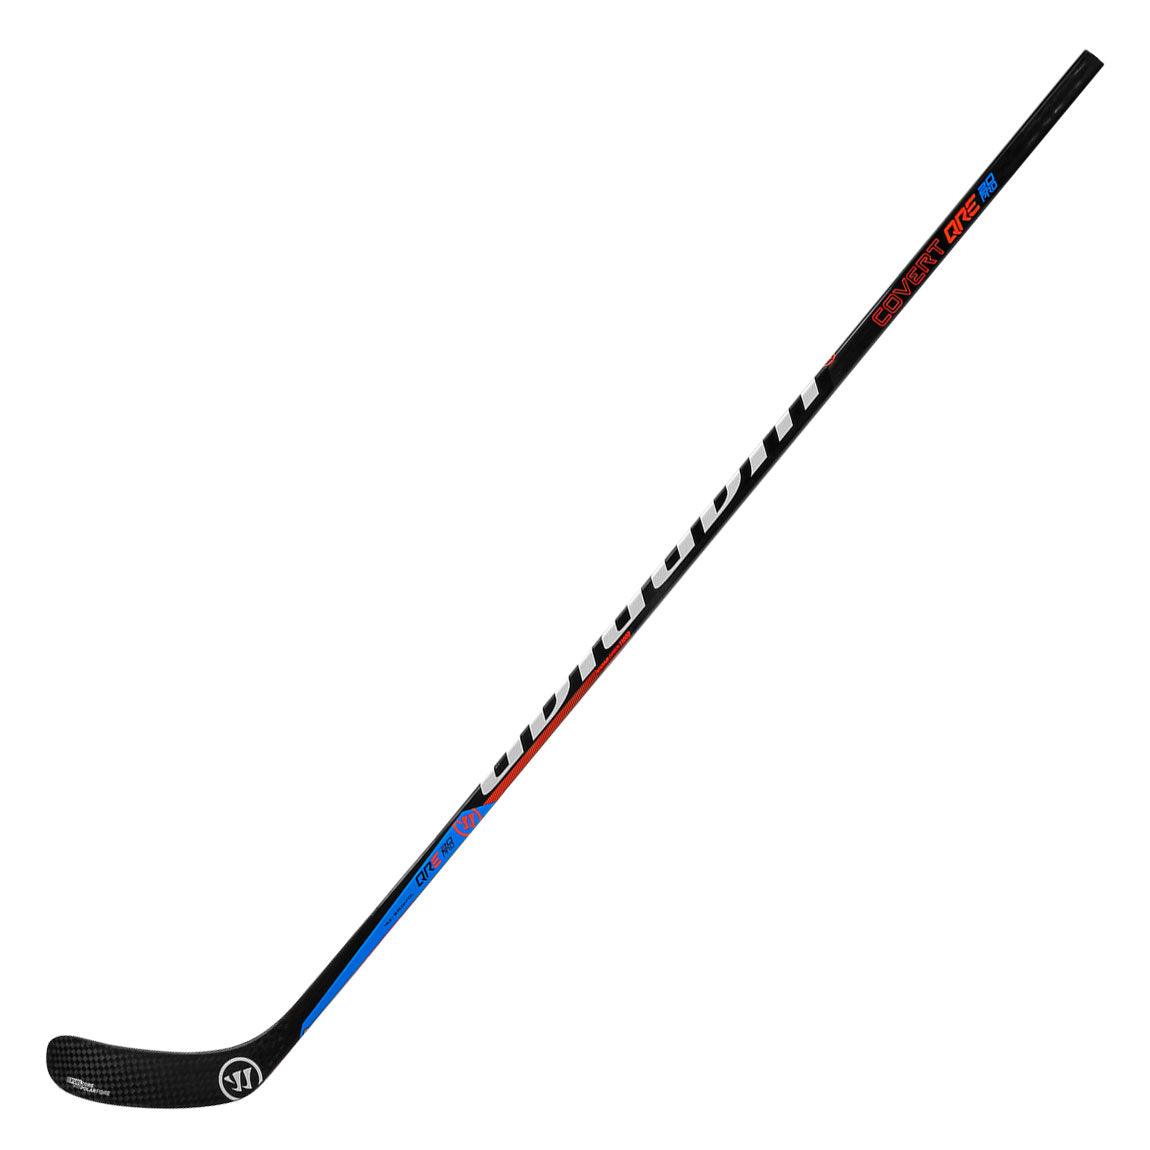 Covert QRE 20 Pro Hockey Stick - Junior - Sports Excellence